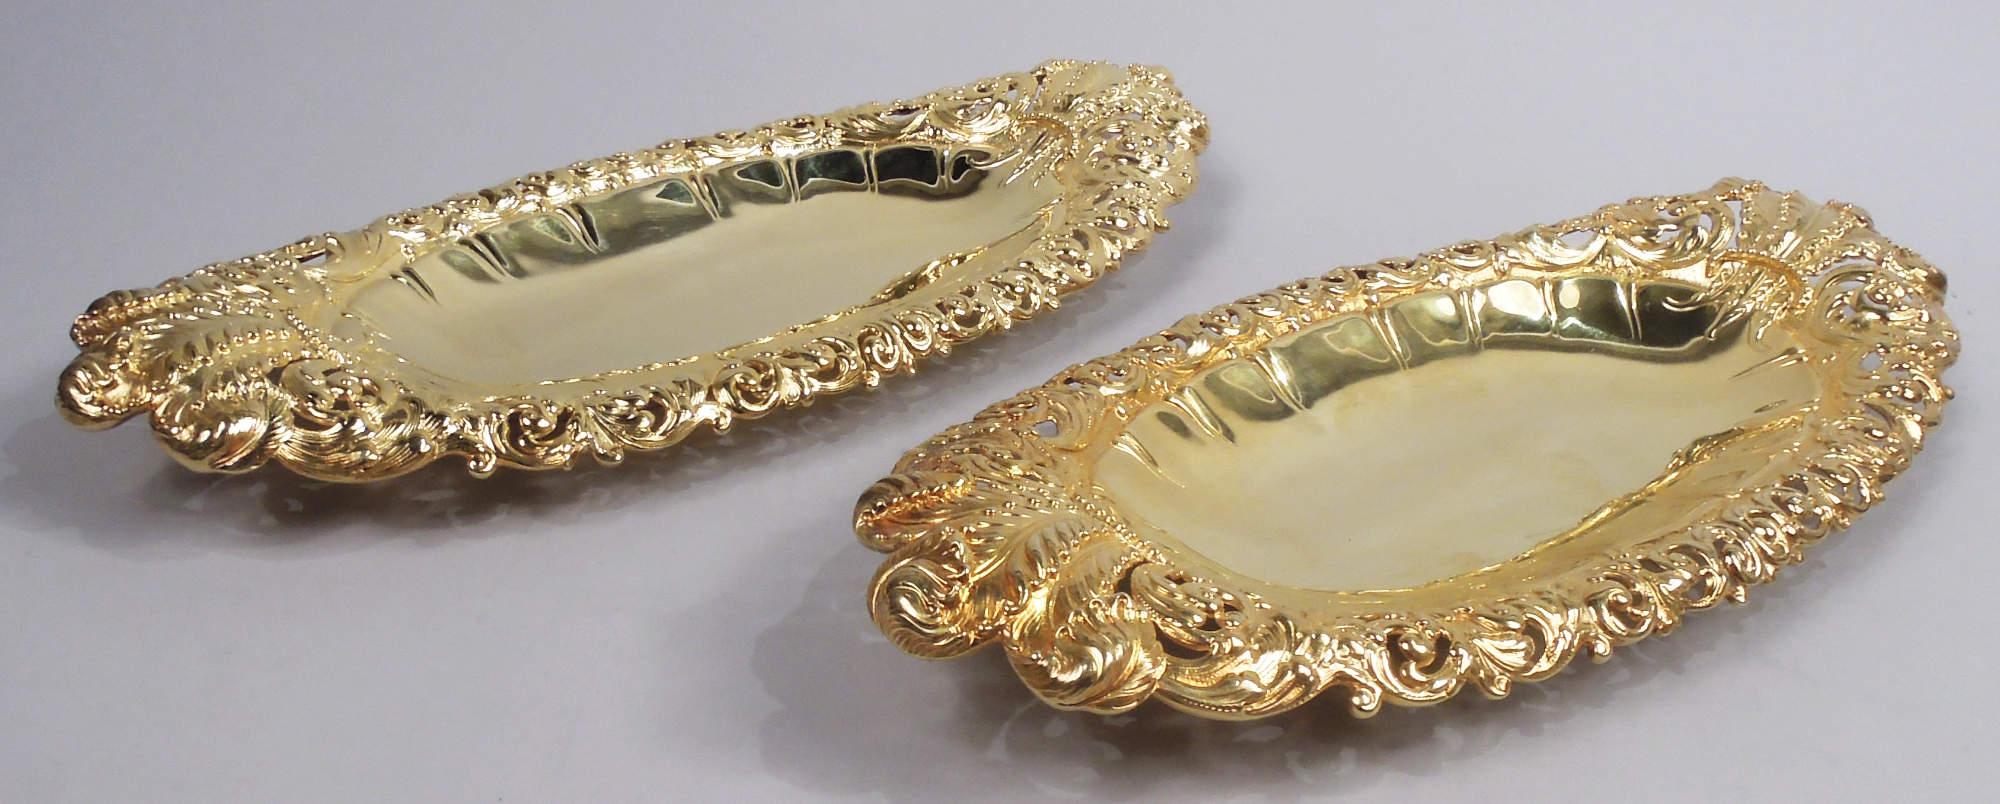 Pair of Victorian sterling silver bread trays. Made by Tiffany & Co. in New York. Ovoid well with fluid egg-and-dart border. Pierced and chased rim with dynamic leafing scrollwork; Prince of Wales feathers at ends. Sumptuous, nicely toned gilding.